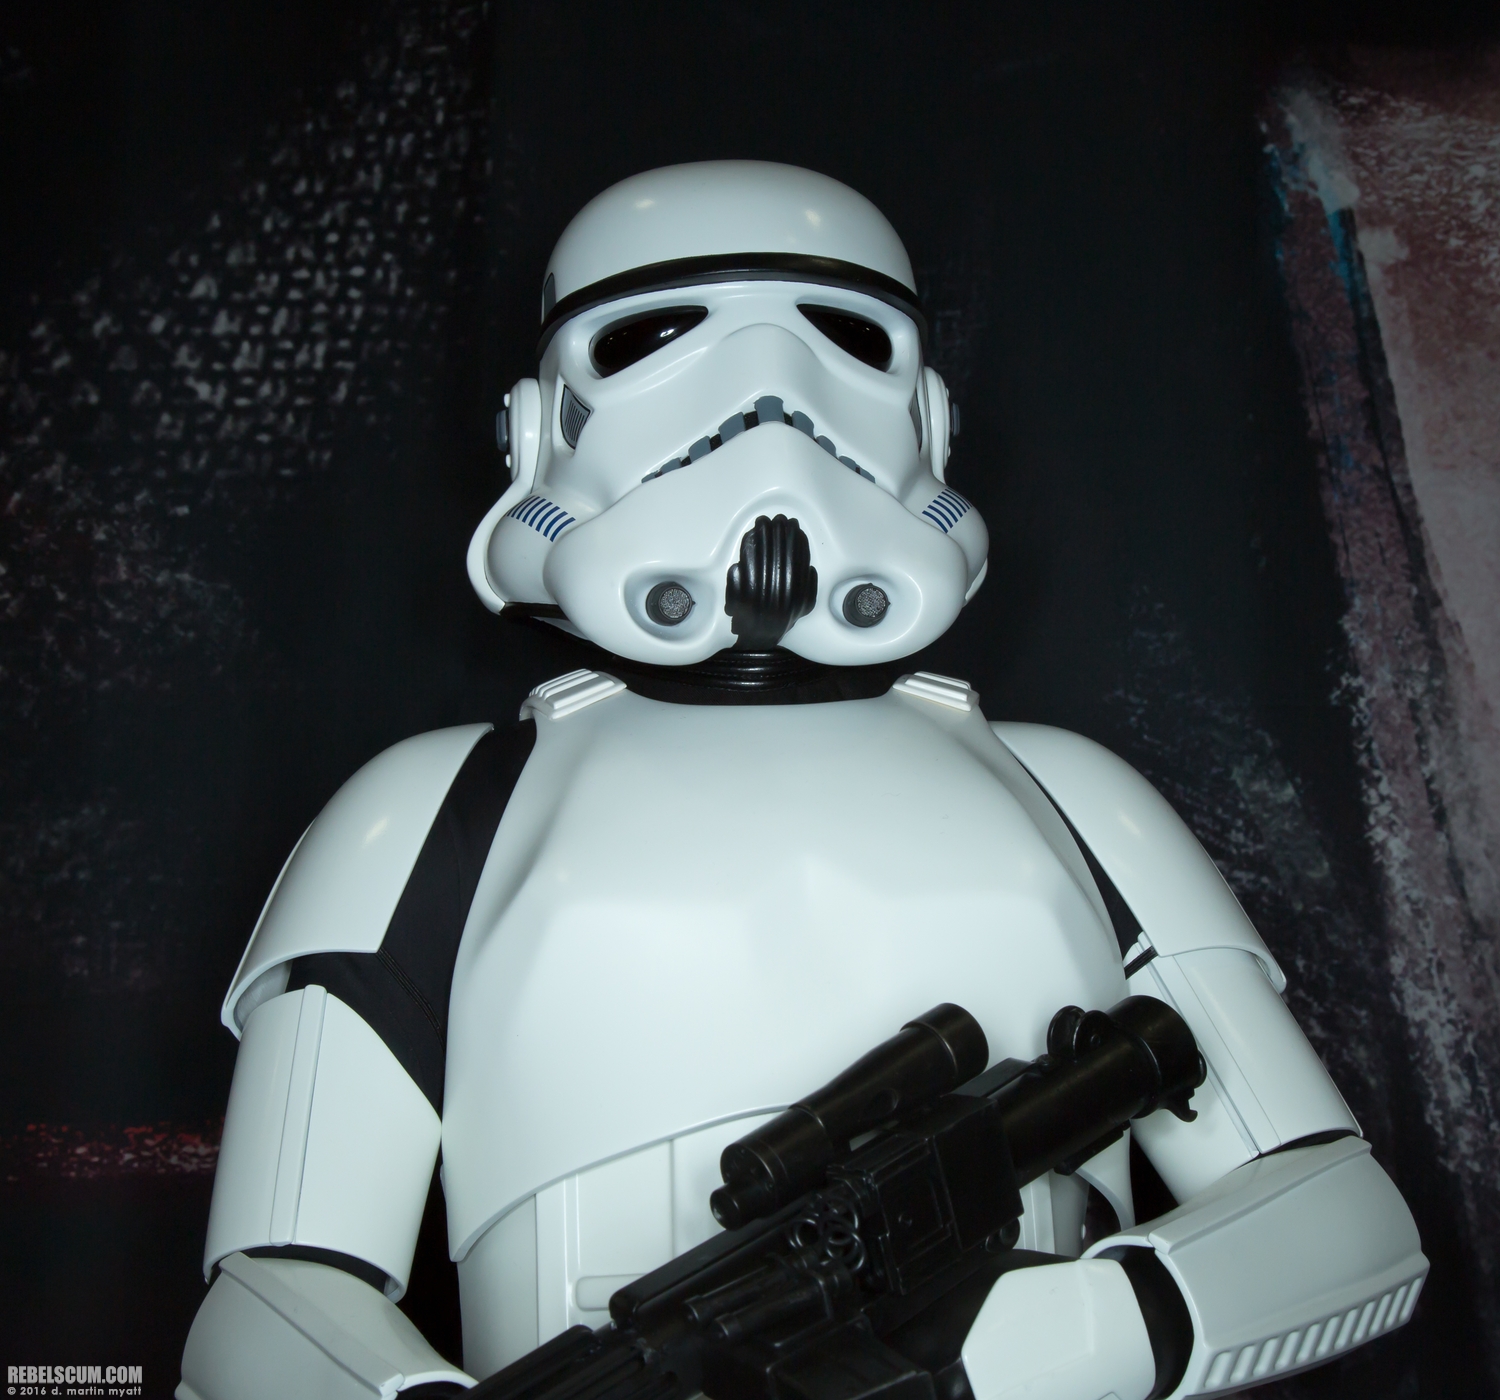 2016-SDCC-Sideshow-Collectibles-Star-Wars-029.jpg